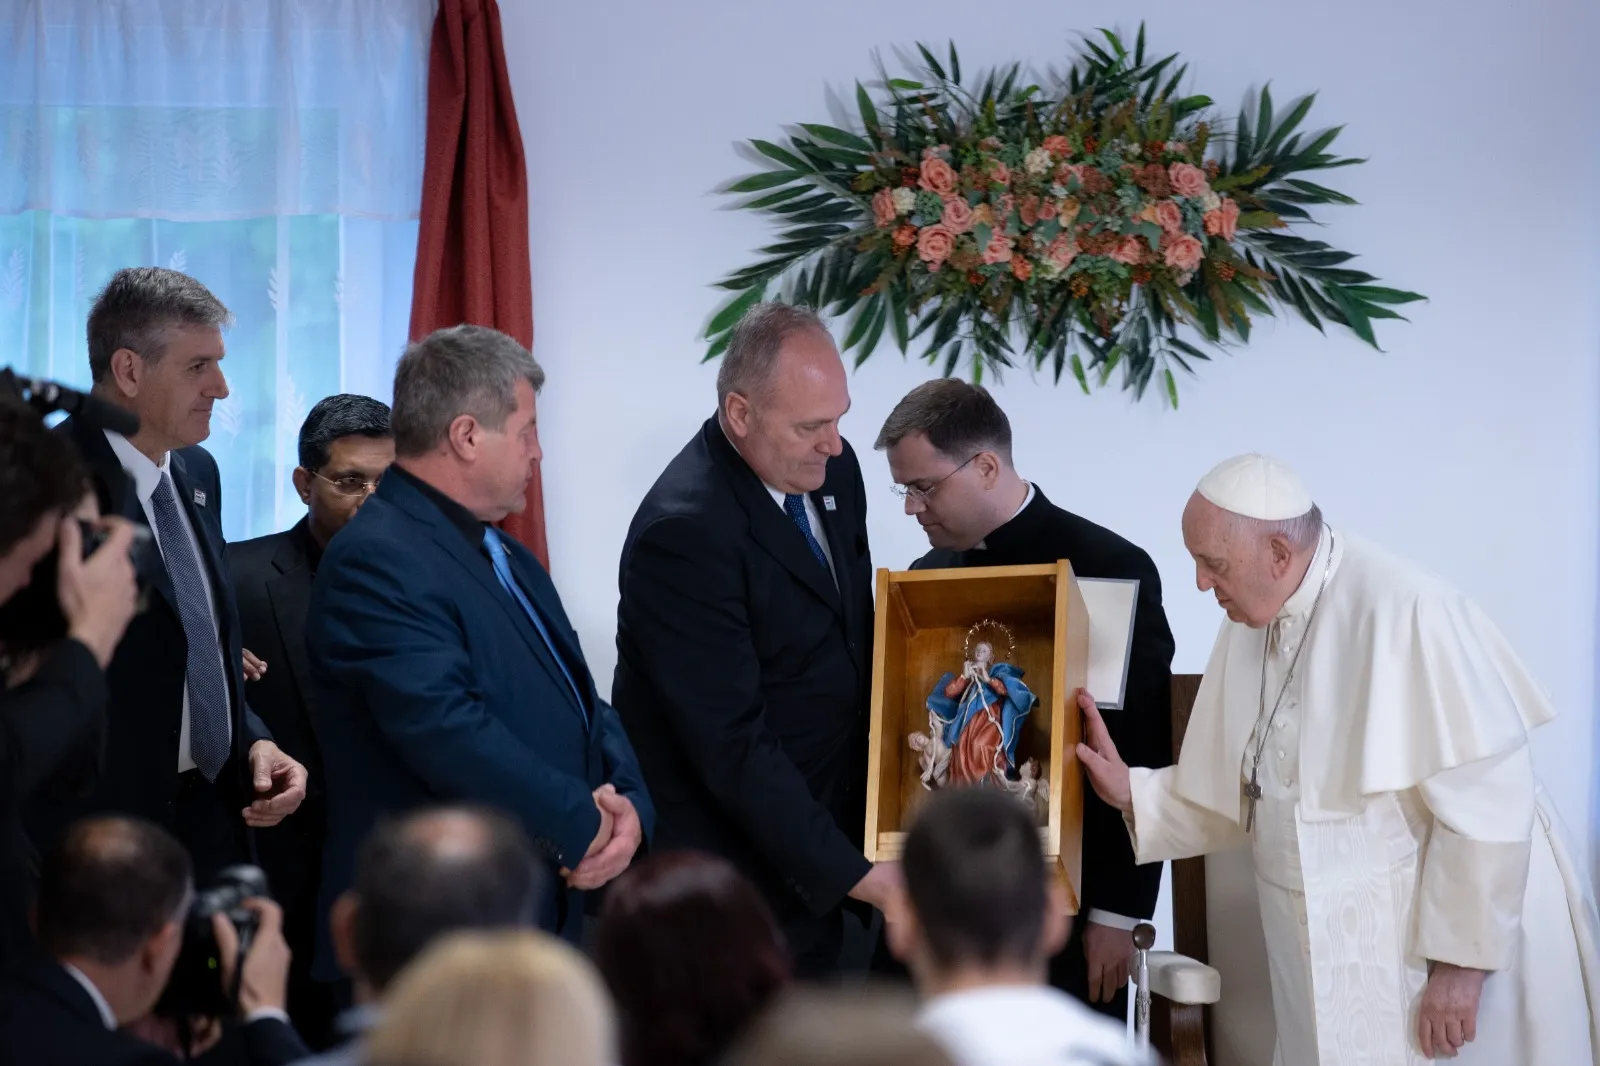 Pope Francis presents an image of Our Lady, Undoer of Knots, to staff and residents of the Blessed László Batthyány-Strattmann Institute for children and adults with visual impairments and other disabilities on April 29, 2029, in Budapest, Hungary. Daniel Ibañez/CNA